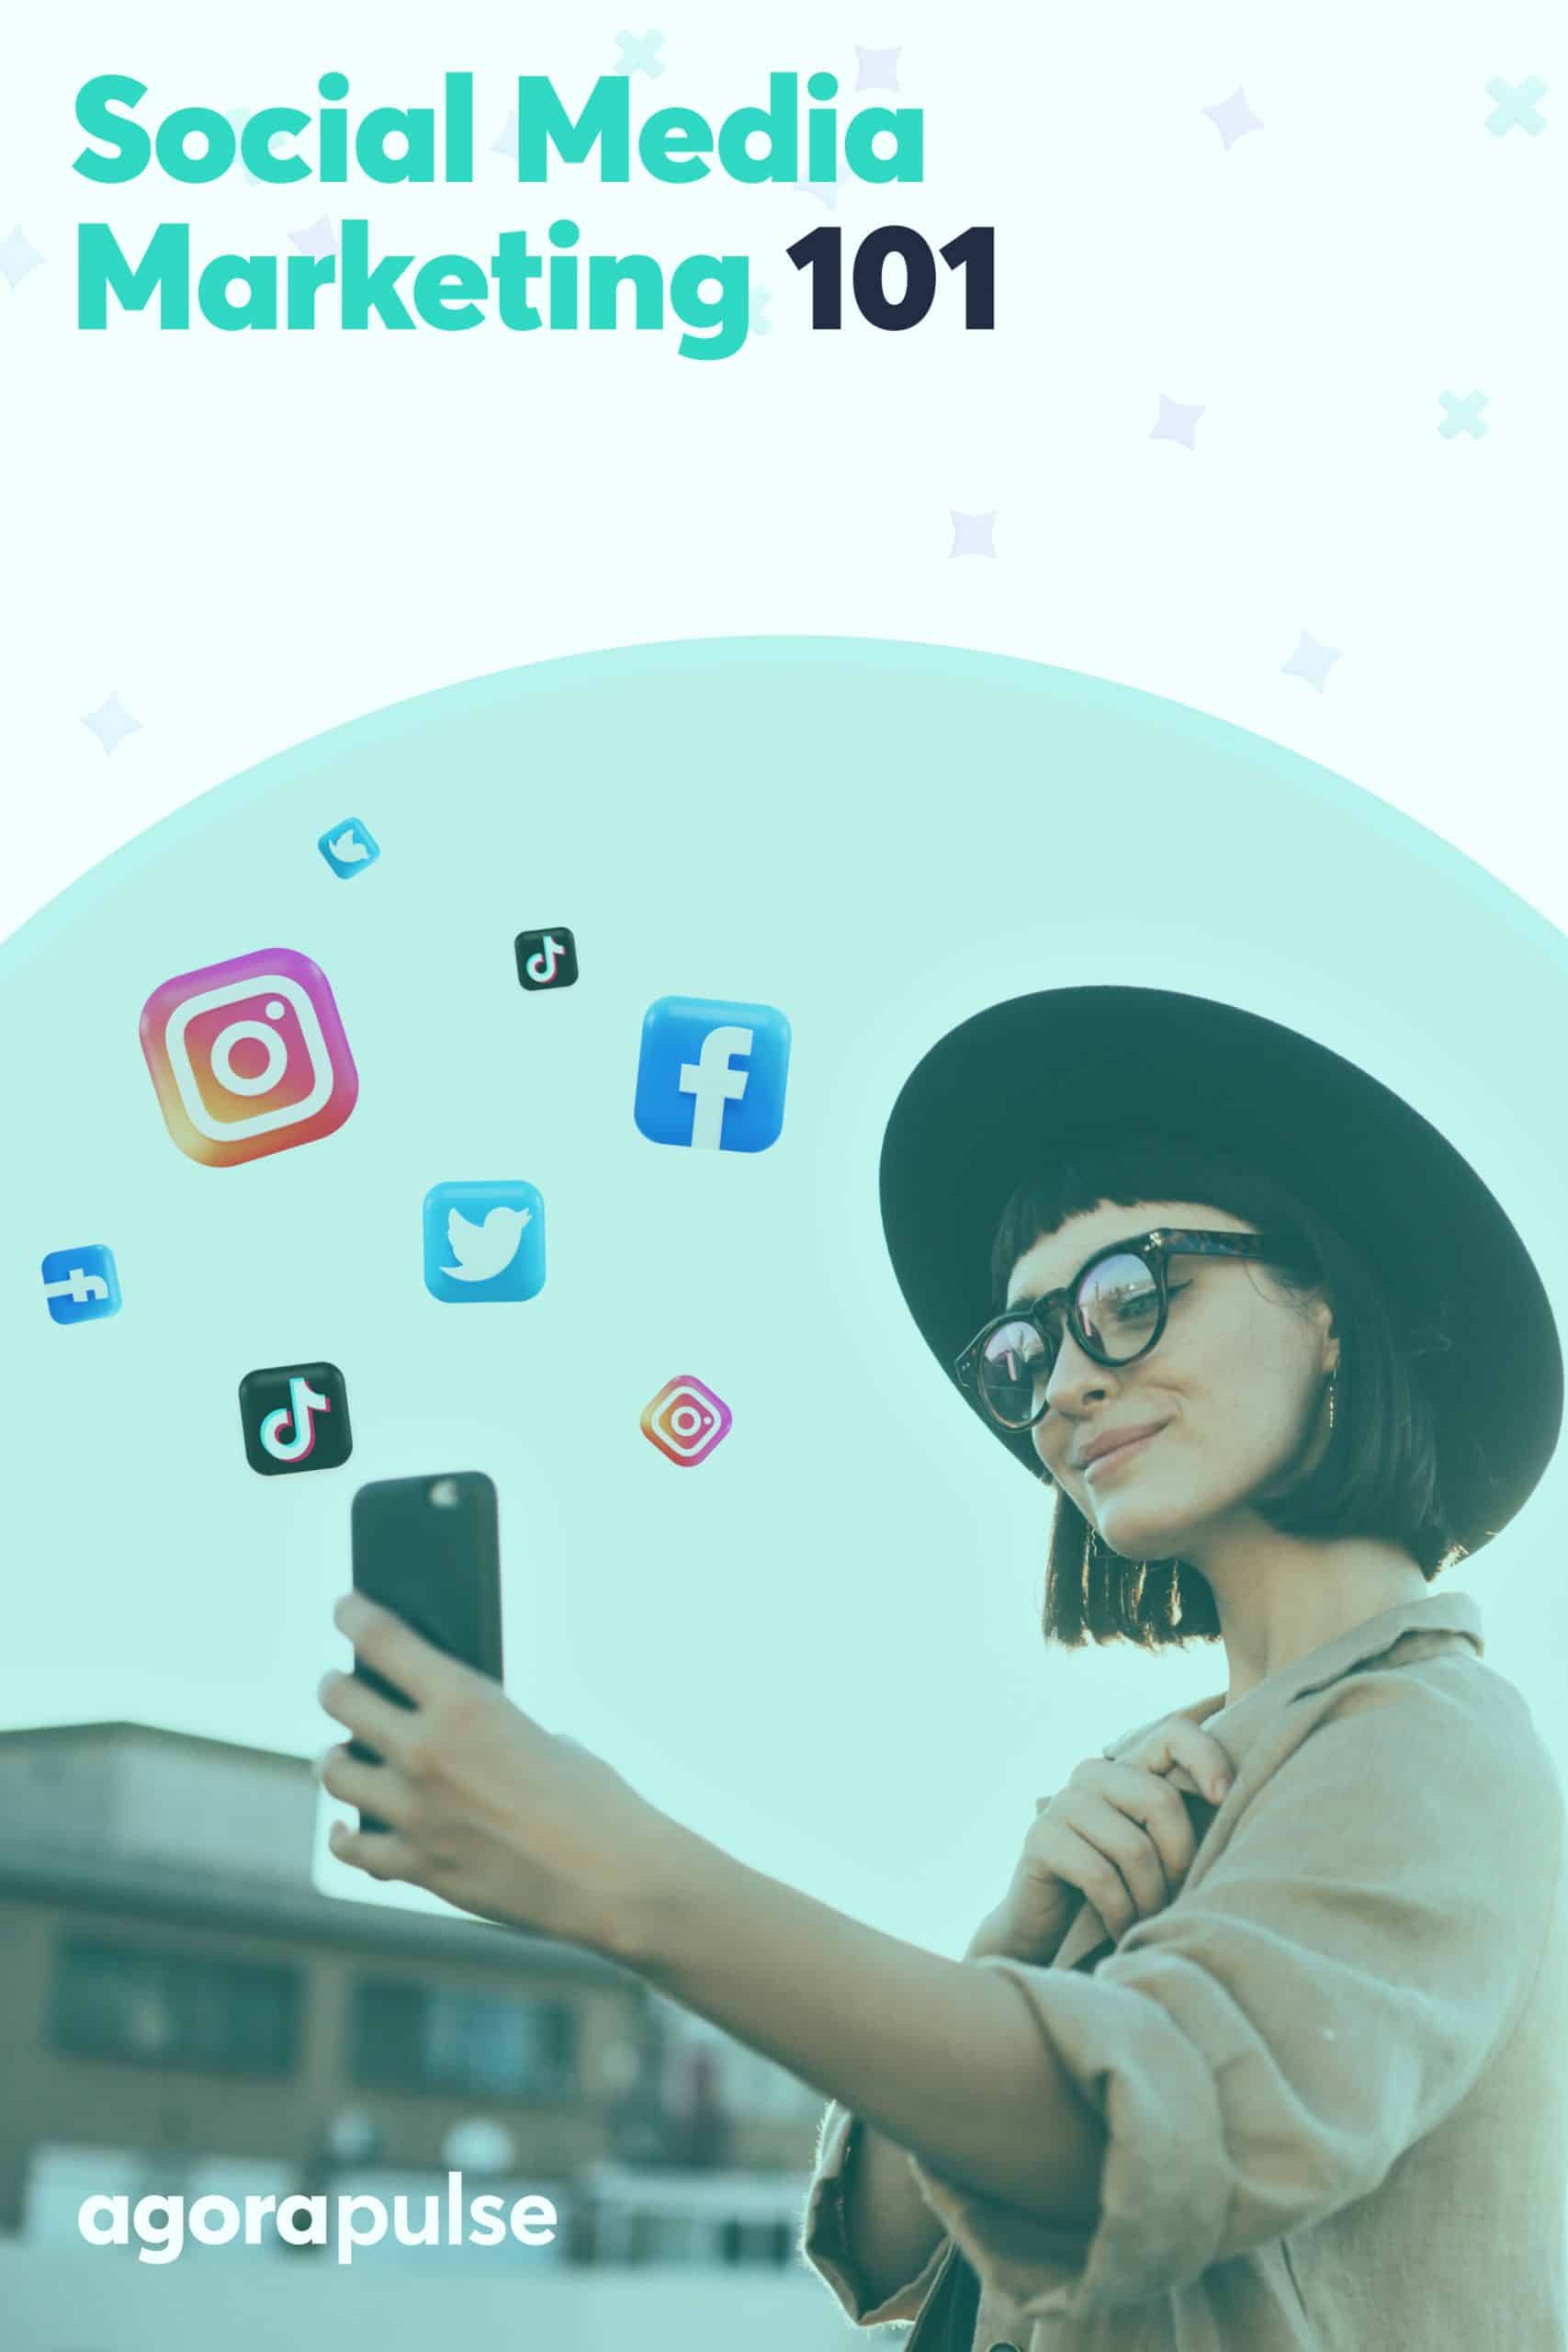 Social Media Marketing: What Every Smart Social Media Manager Needs to Know